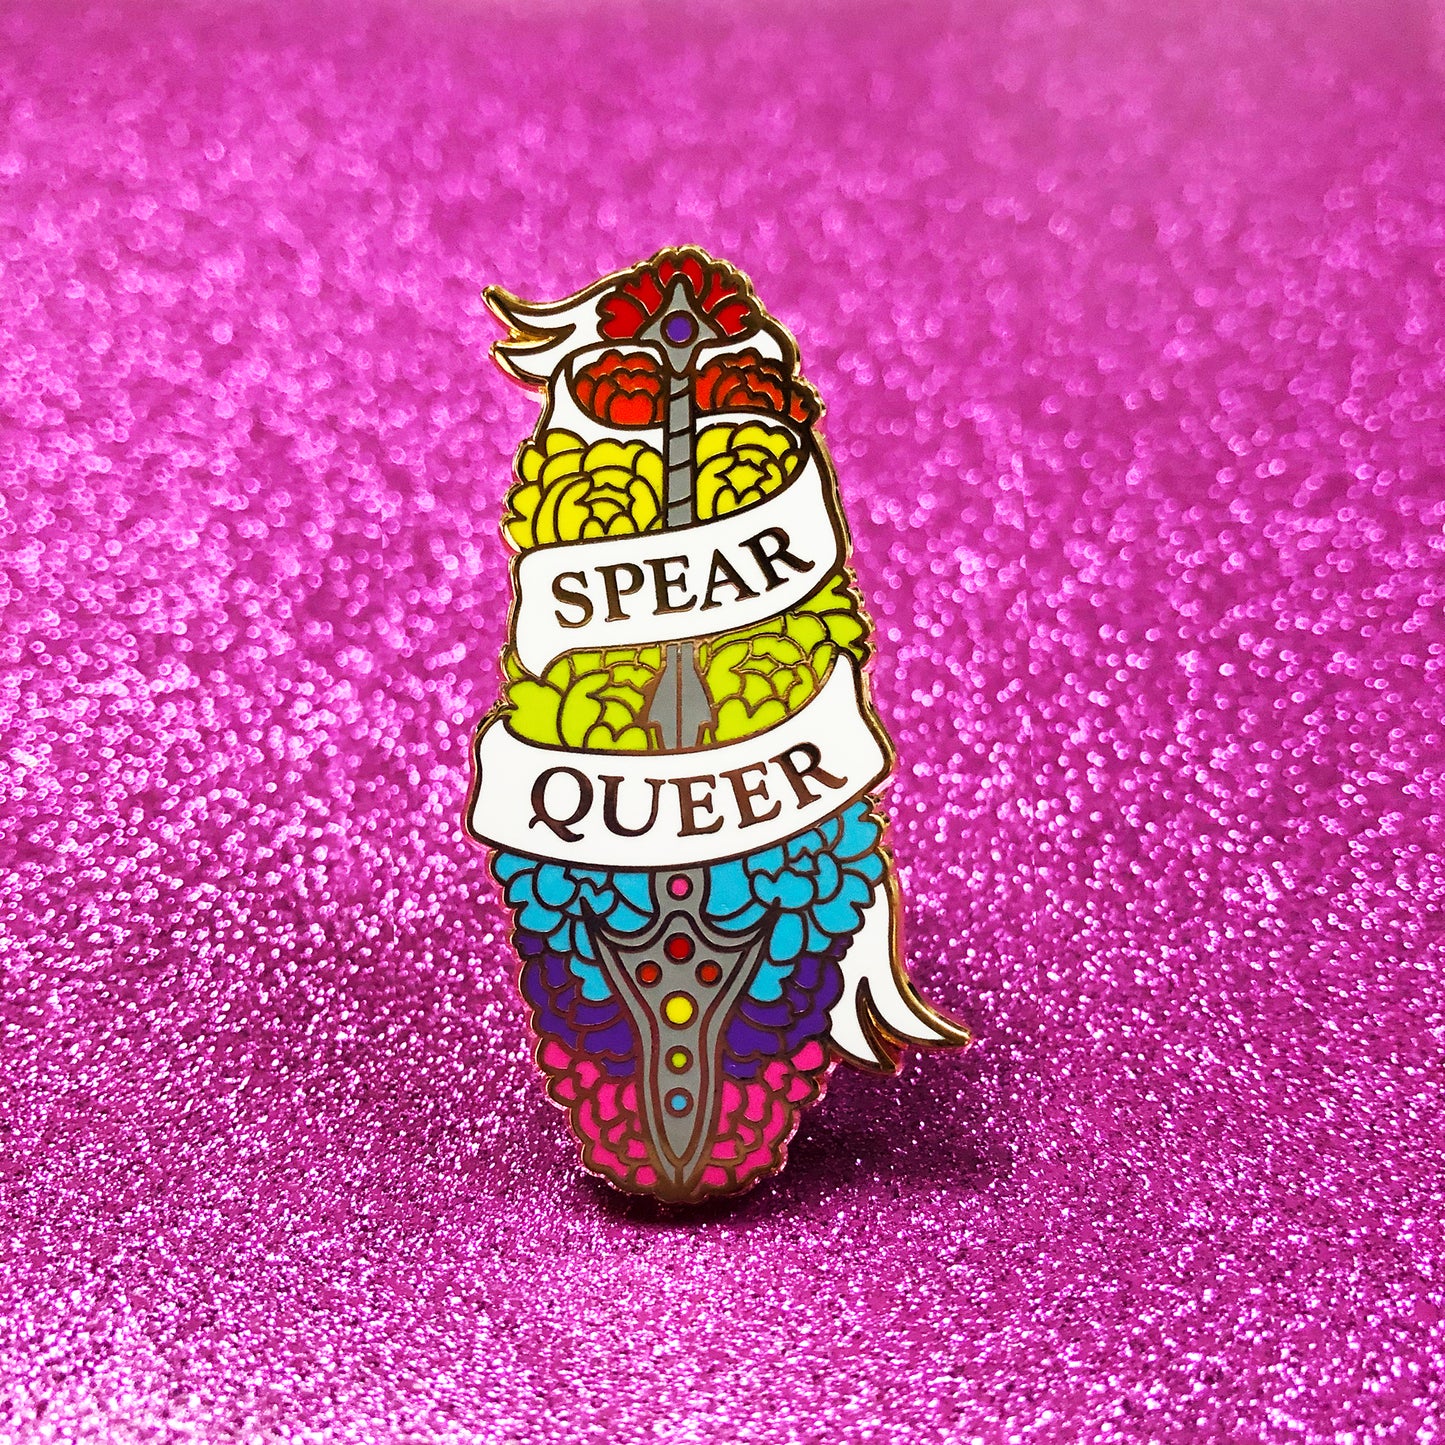 The goldcast pin features a decorative spear in a bed of flowers in the rainbow hues of the pride flag. A ribbon trails across the front and reads "Spear Queer."